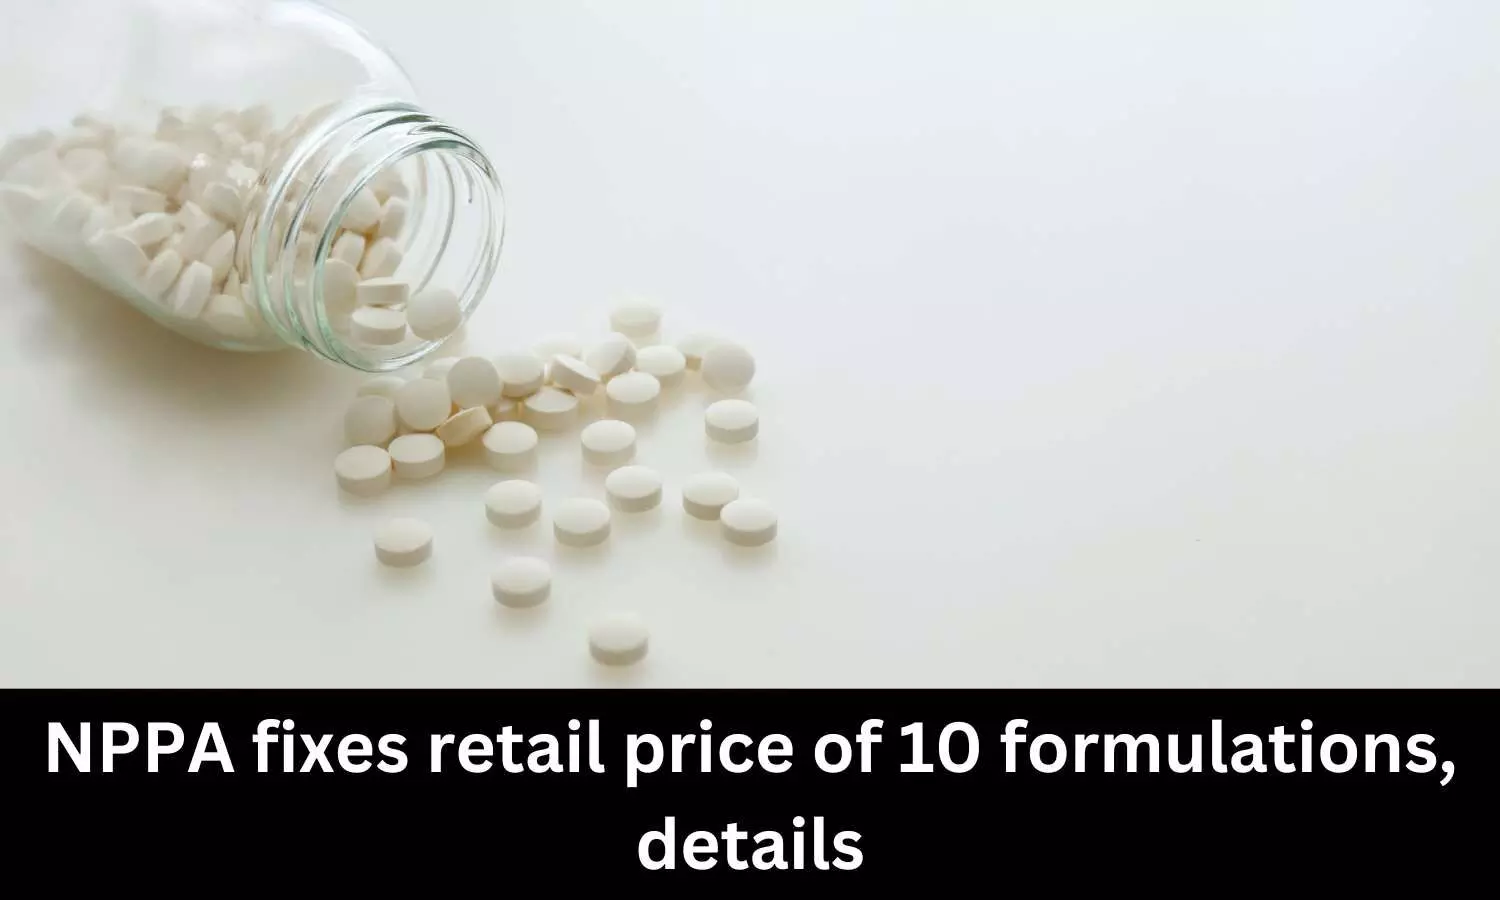 NPPA fixes retail price of 10 formulations